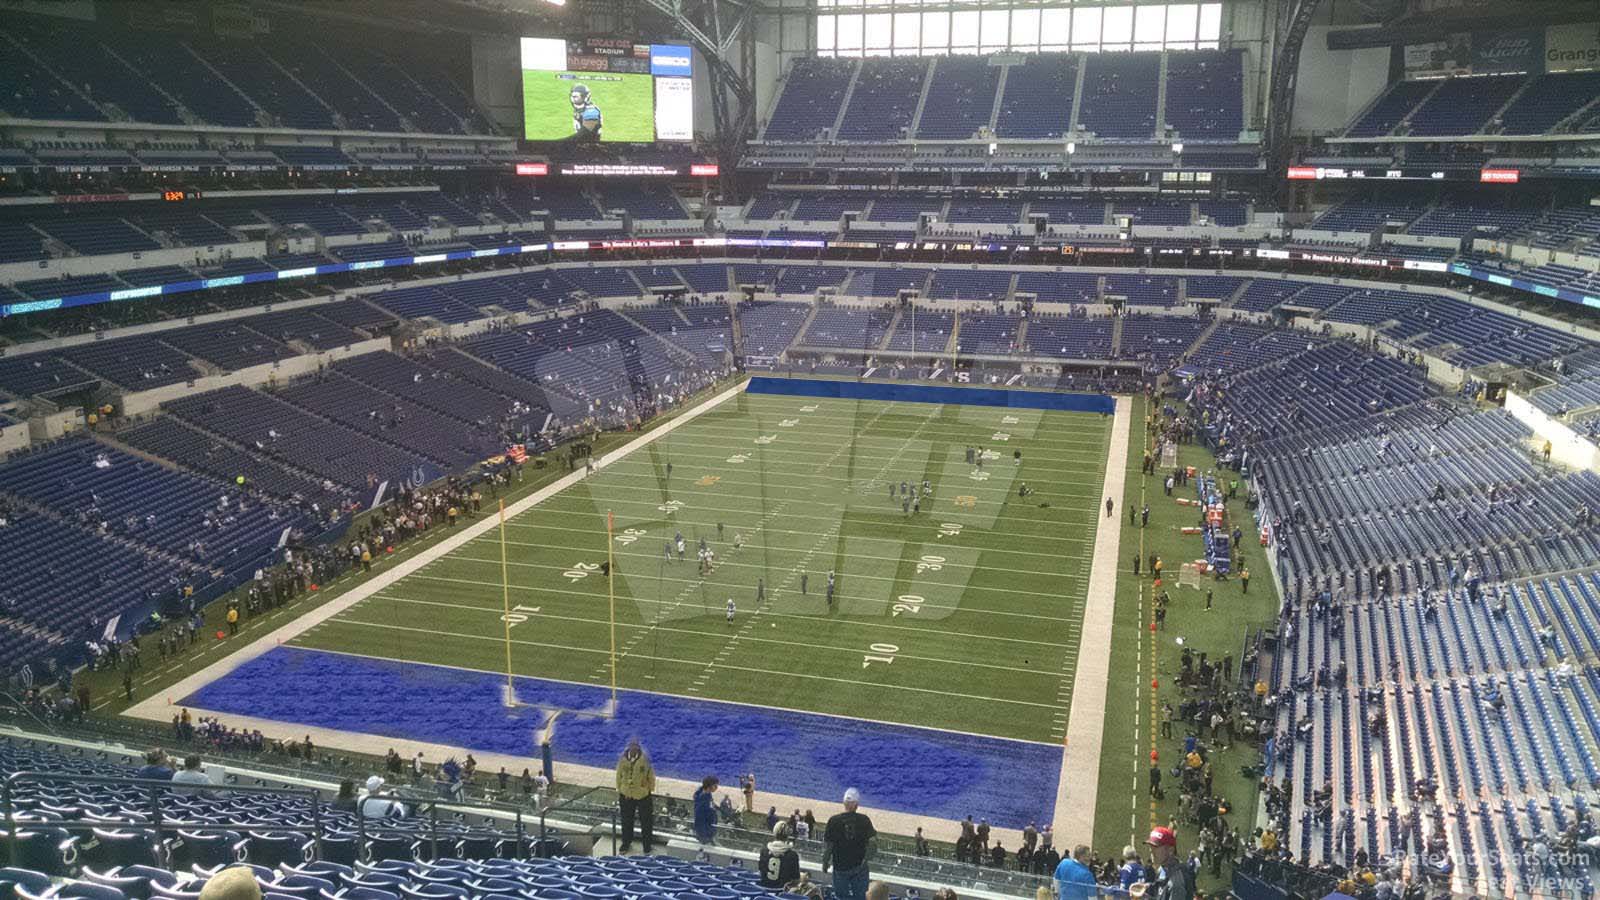 section 451, row 18 seat view  for football - lucas oil stadium